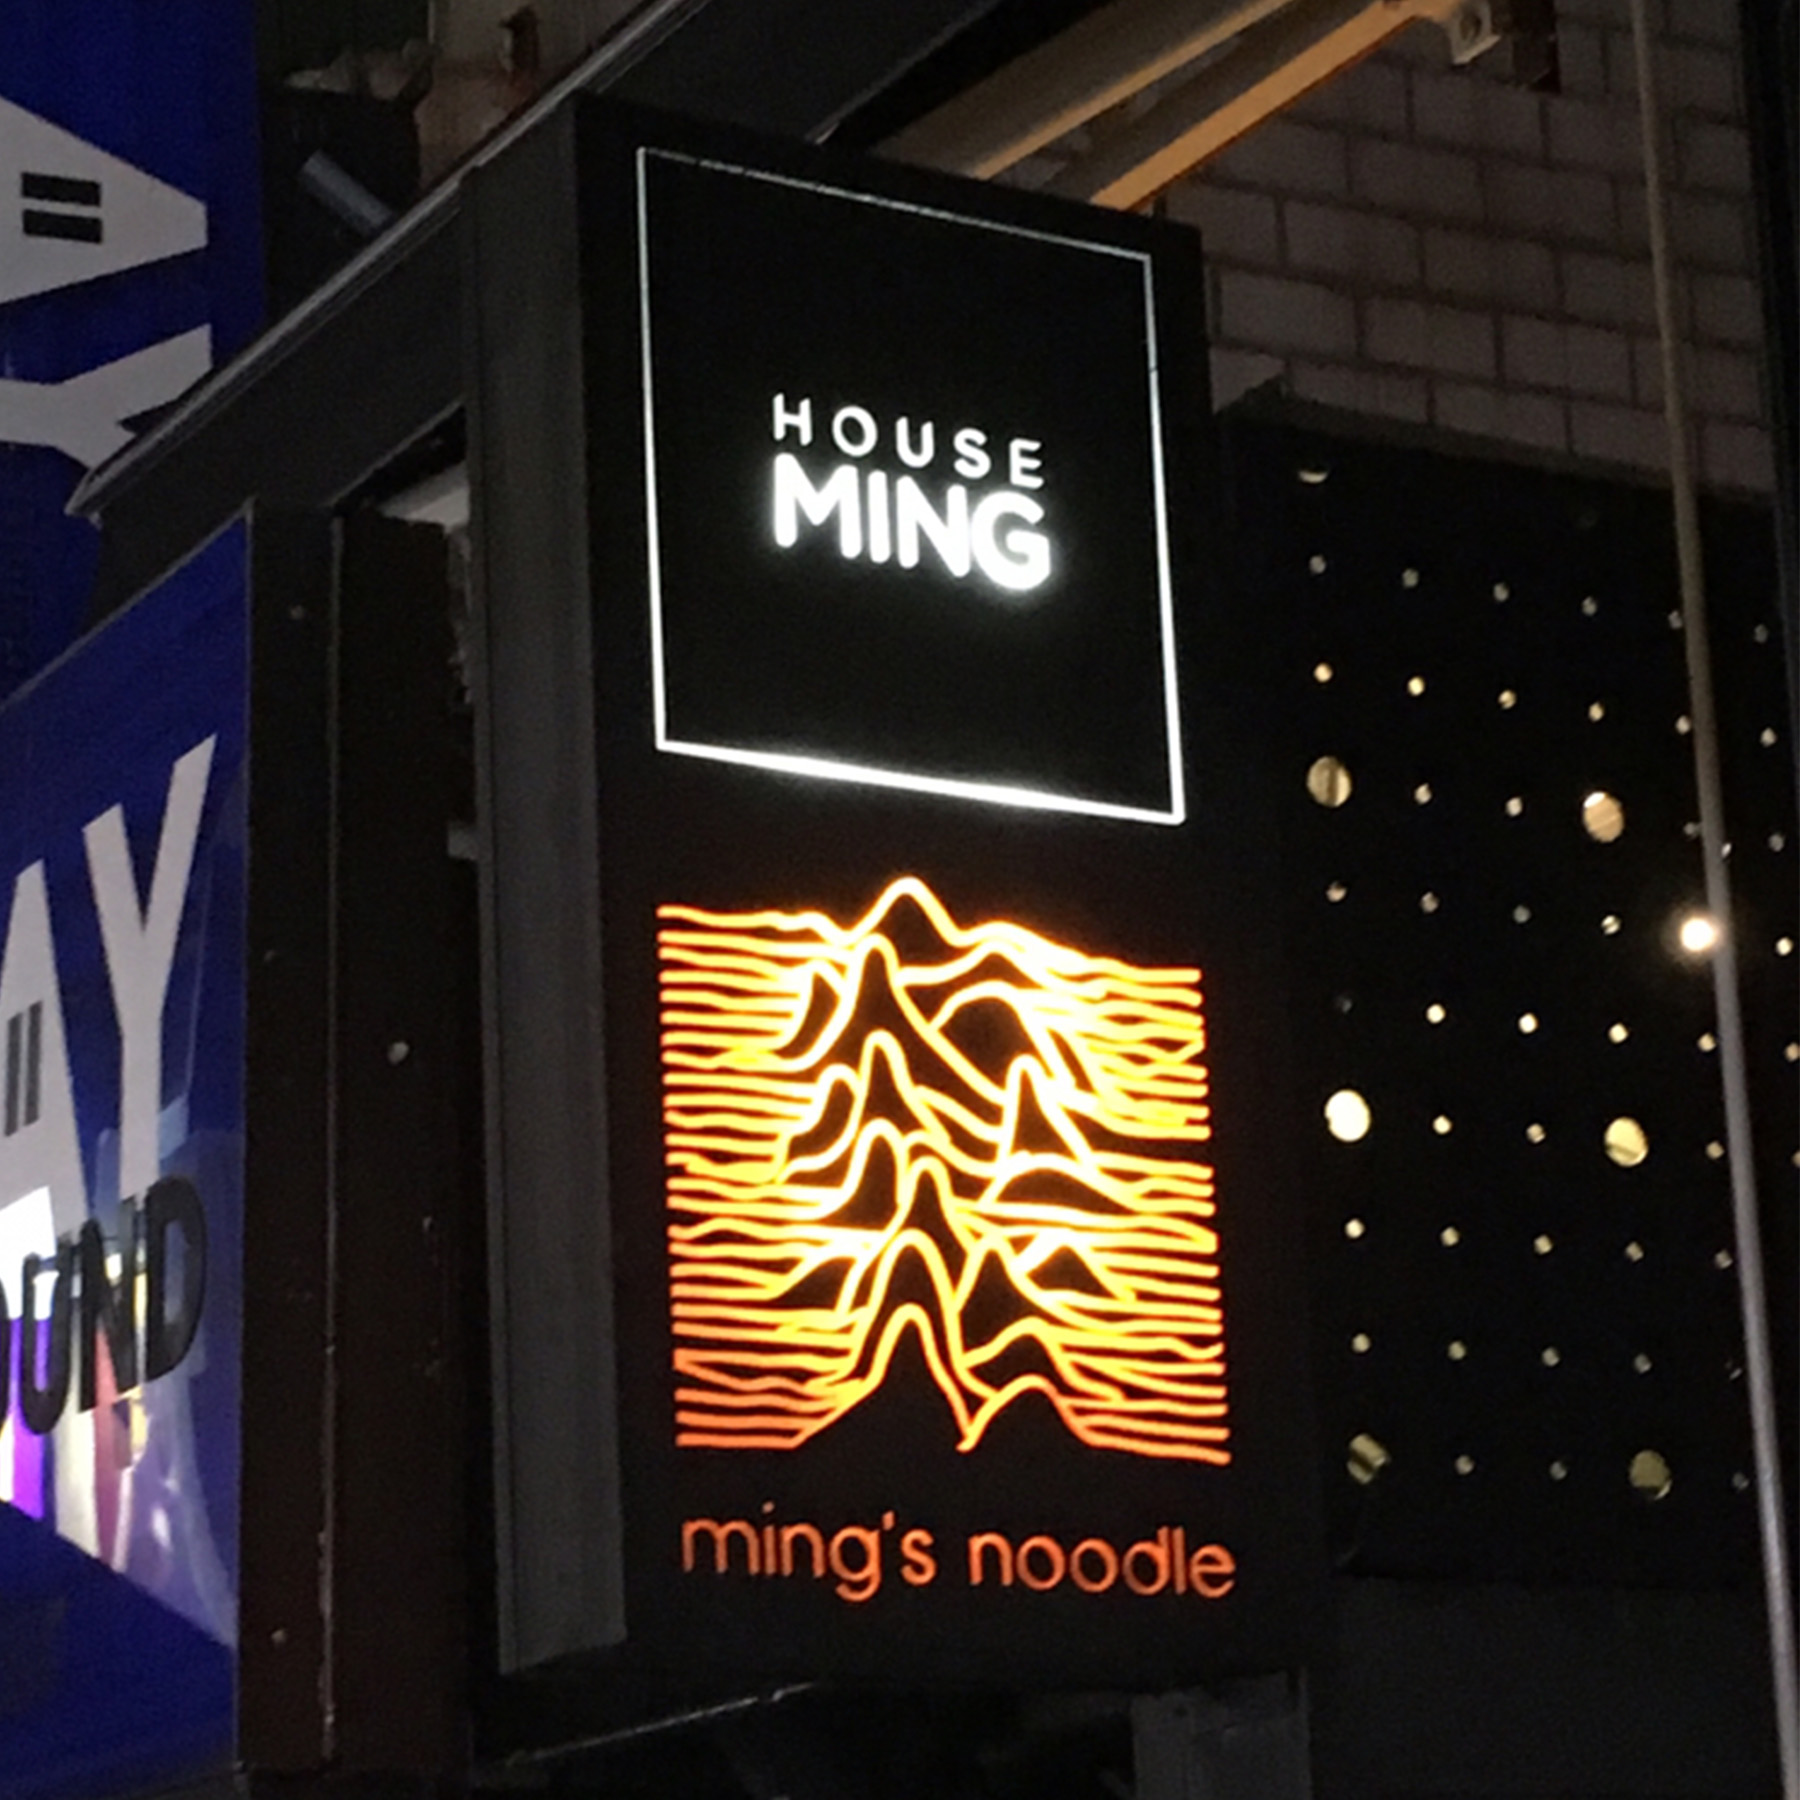 Finally, a noodle house inspired by Joy Division’s seminal Unknown Pleasures album.